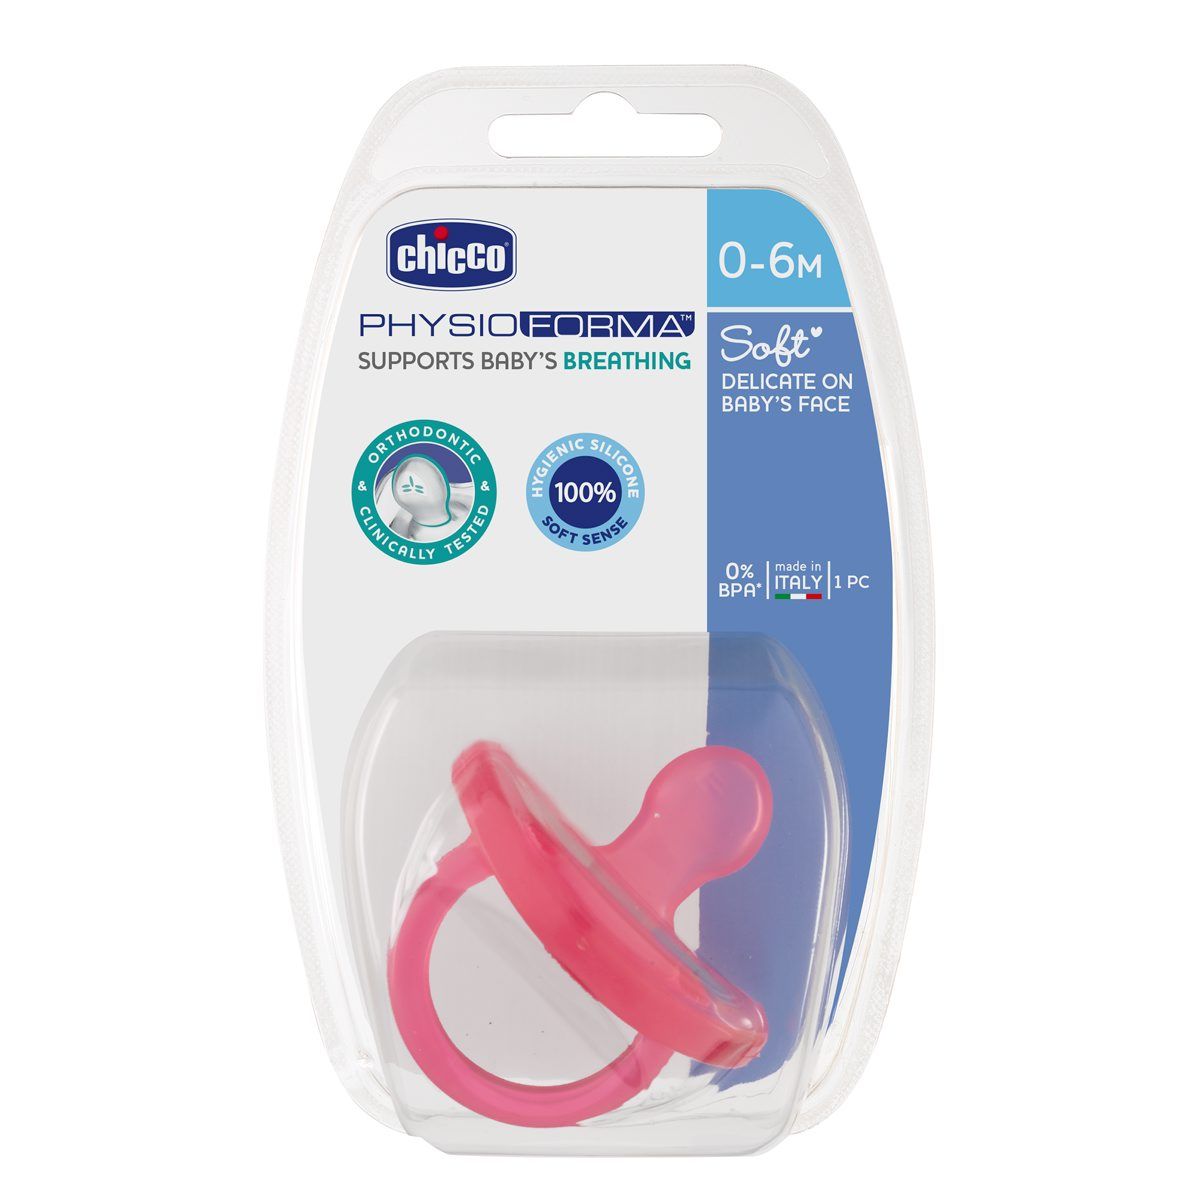 Buy Chicco Physioforma Soft Baby Soother Pink for 0 - 6 Months, 1 Count Online